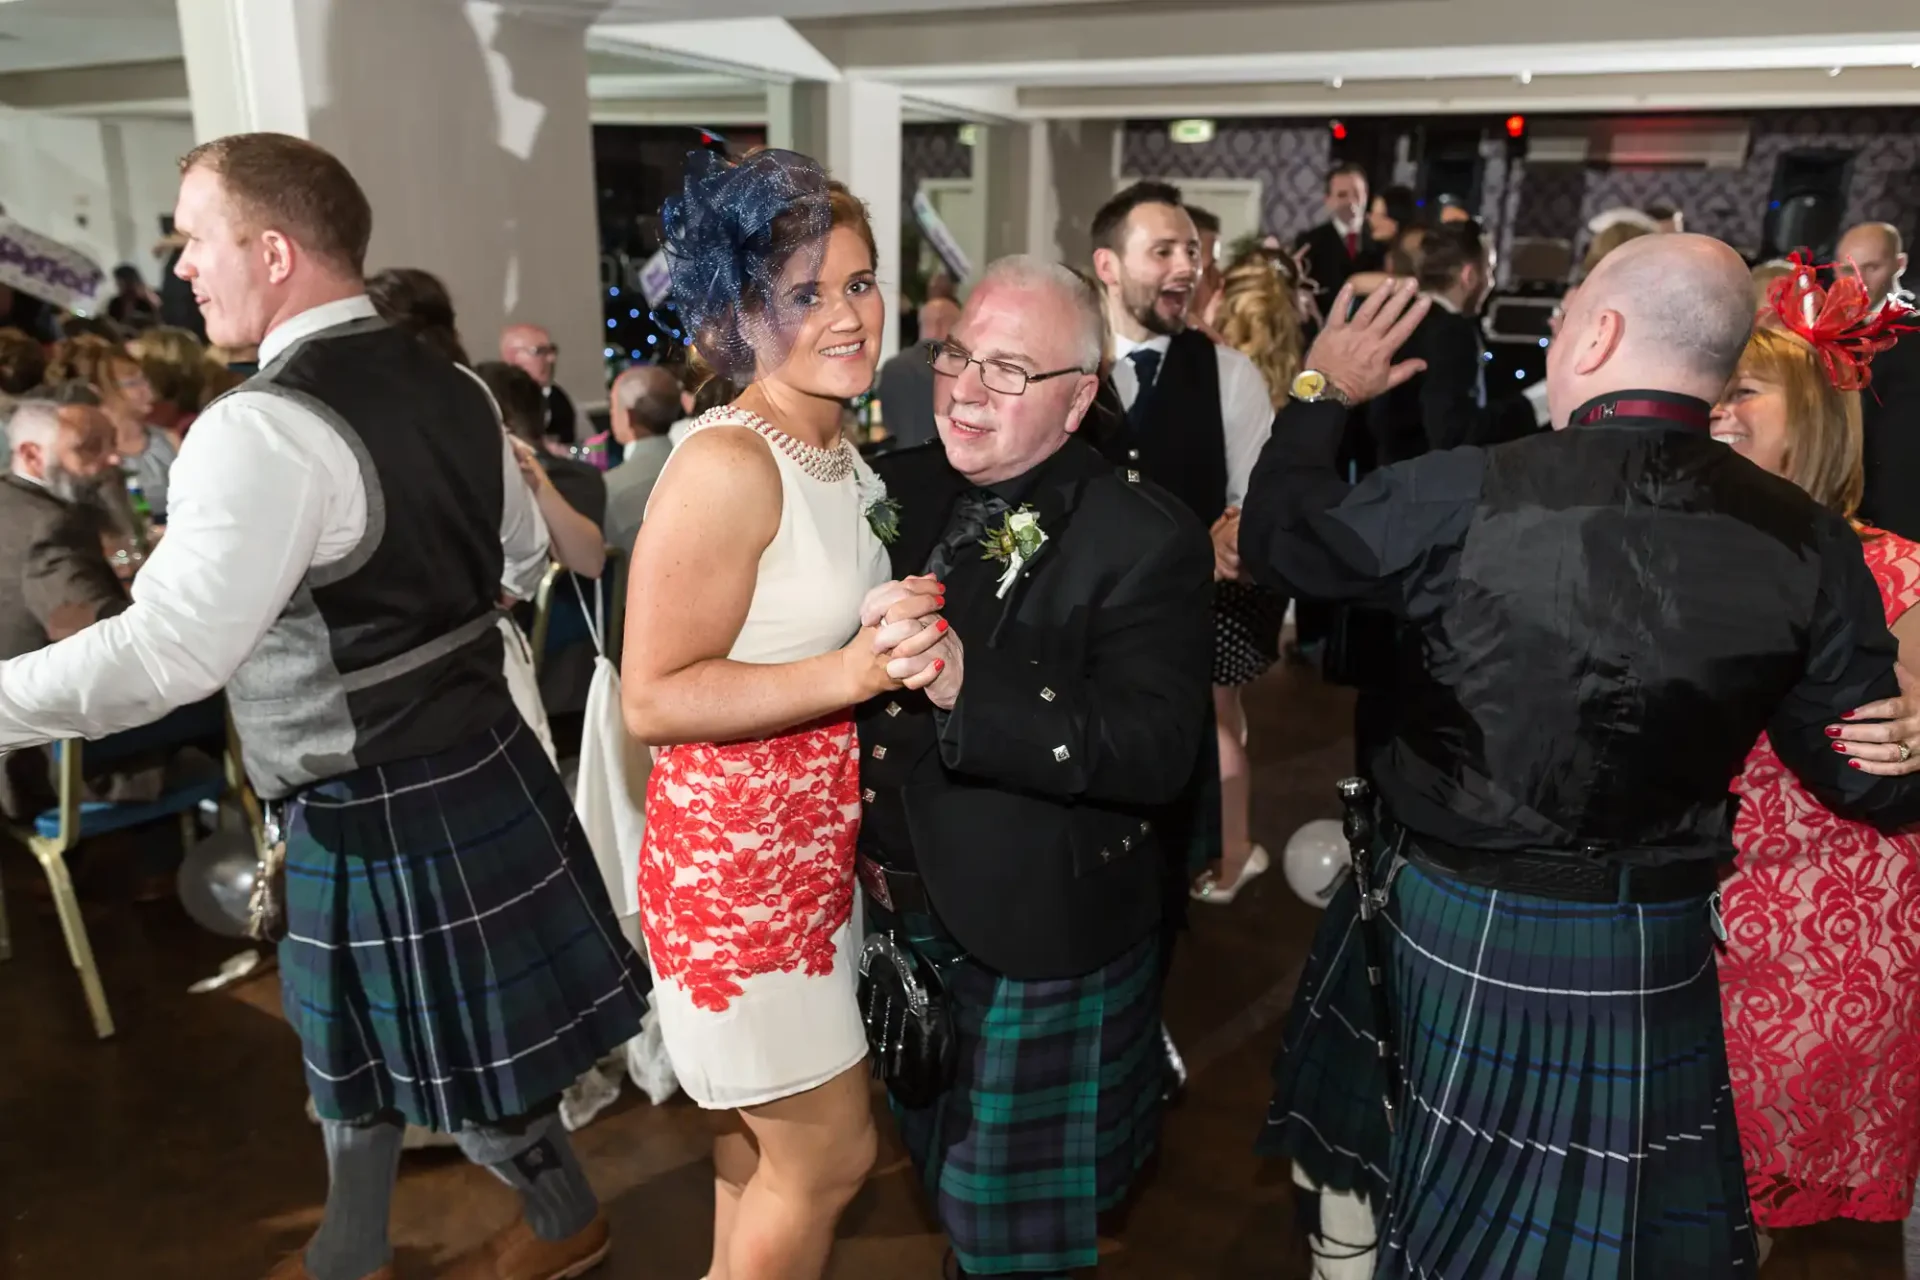 A couple in semi-formal attire, including kilts, dances joyfully among other guests at an indoor celebration.